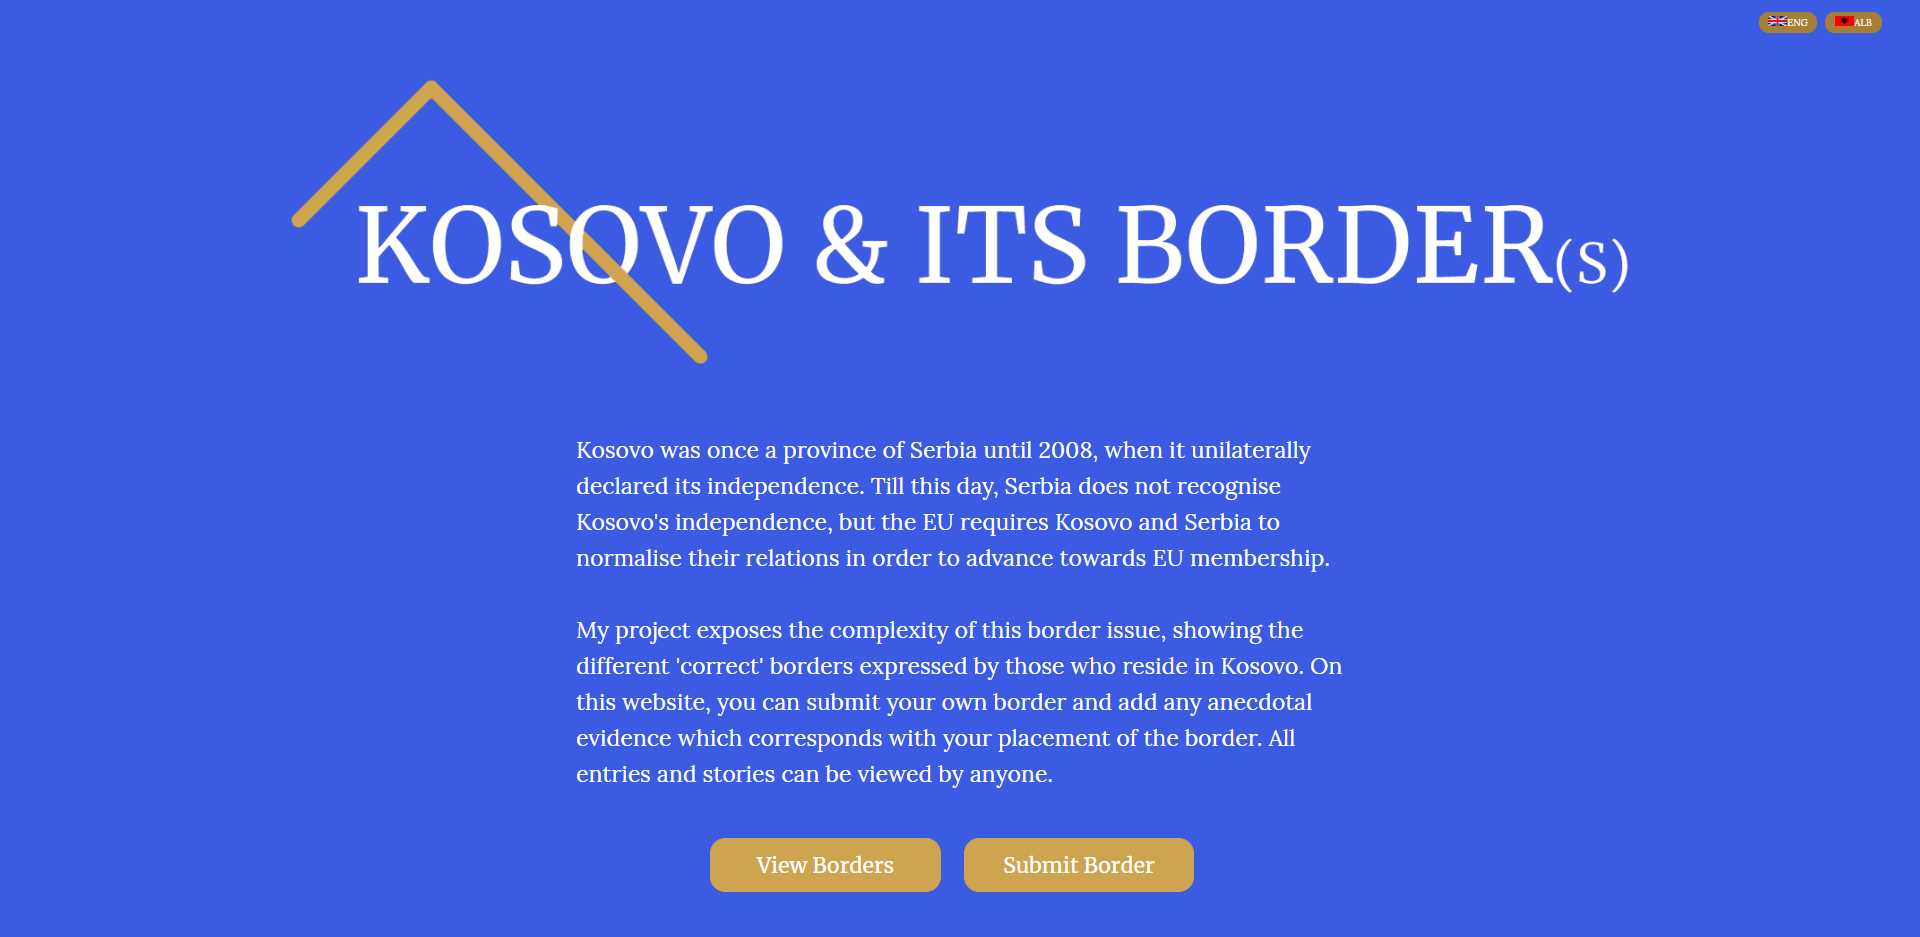 Kosovo & Its Border(s) Interface Overview